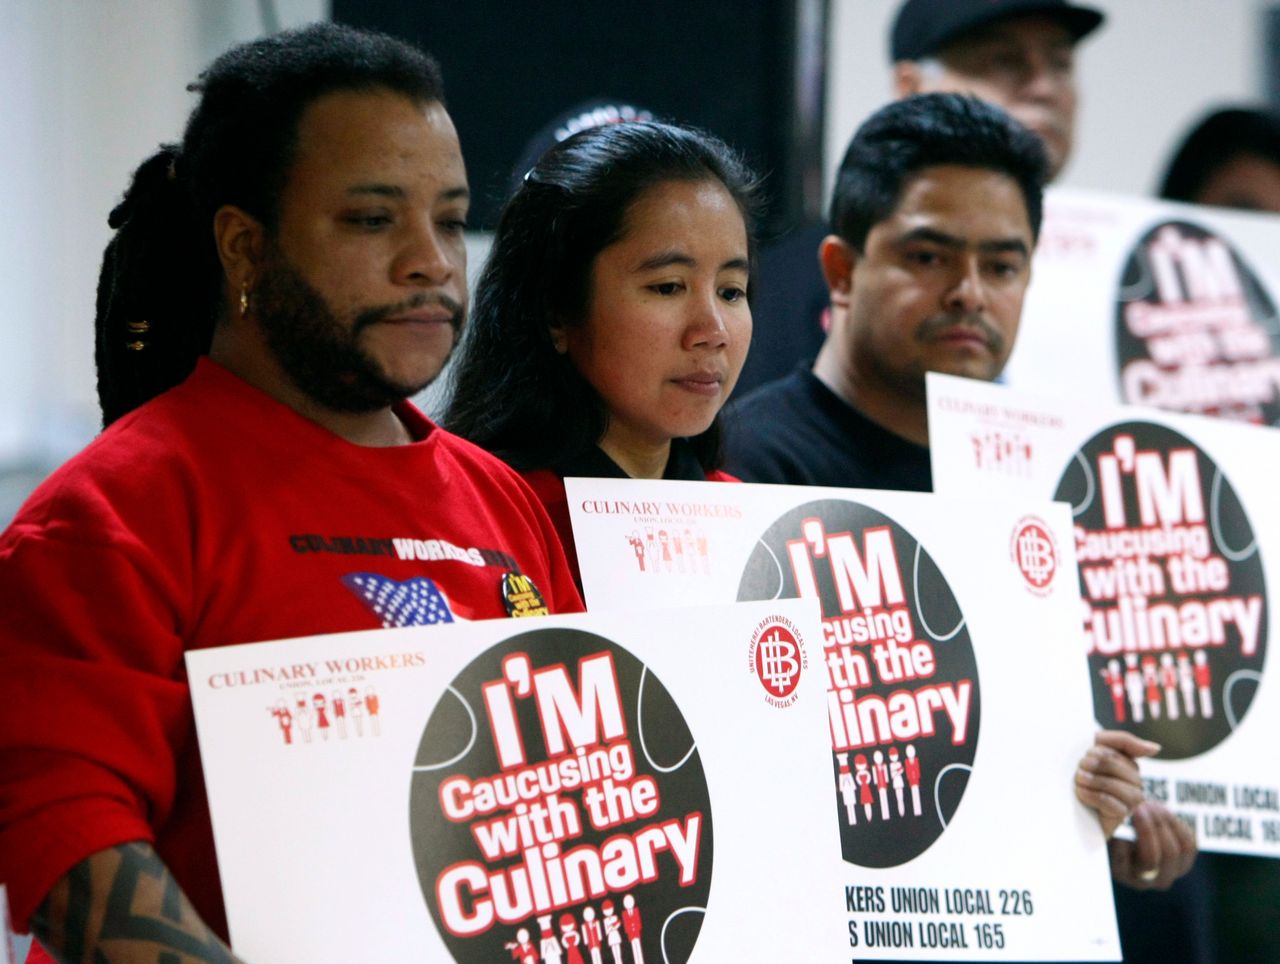 Members of the Culinary Workers Union Local 226 listen to the announcement of the union’s endorsement of Sen. Barack Obama (D-IL) for president in 2008.